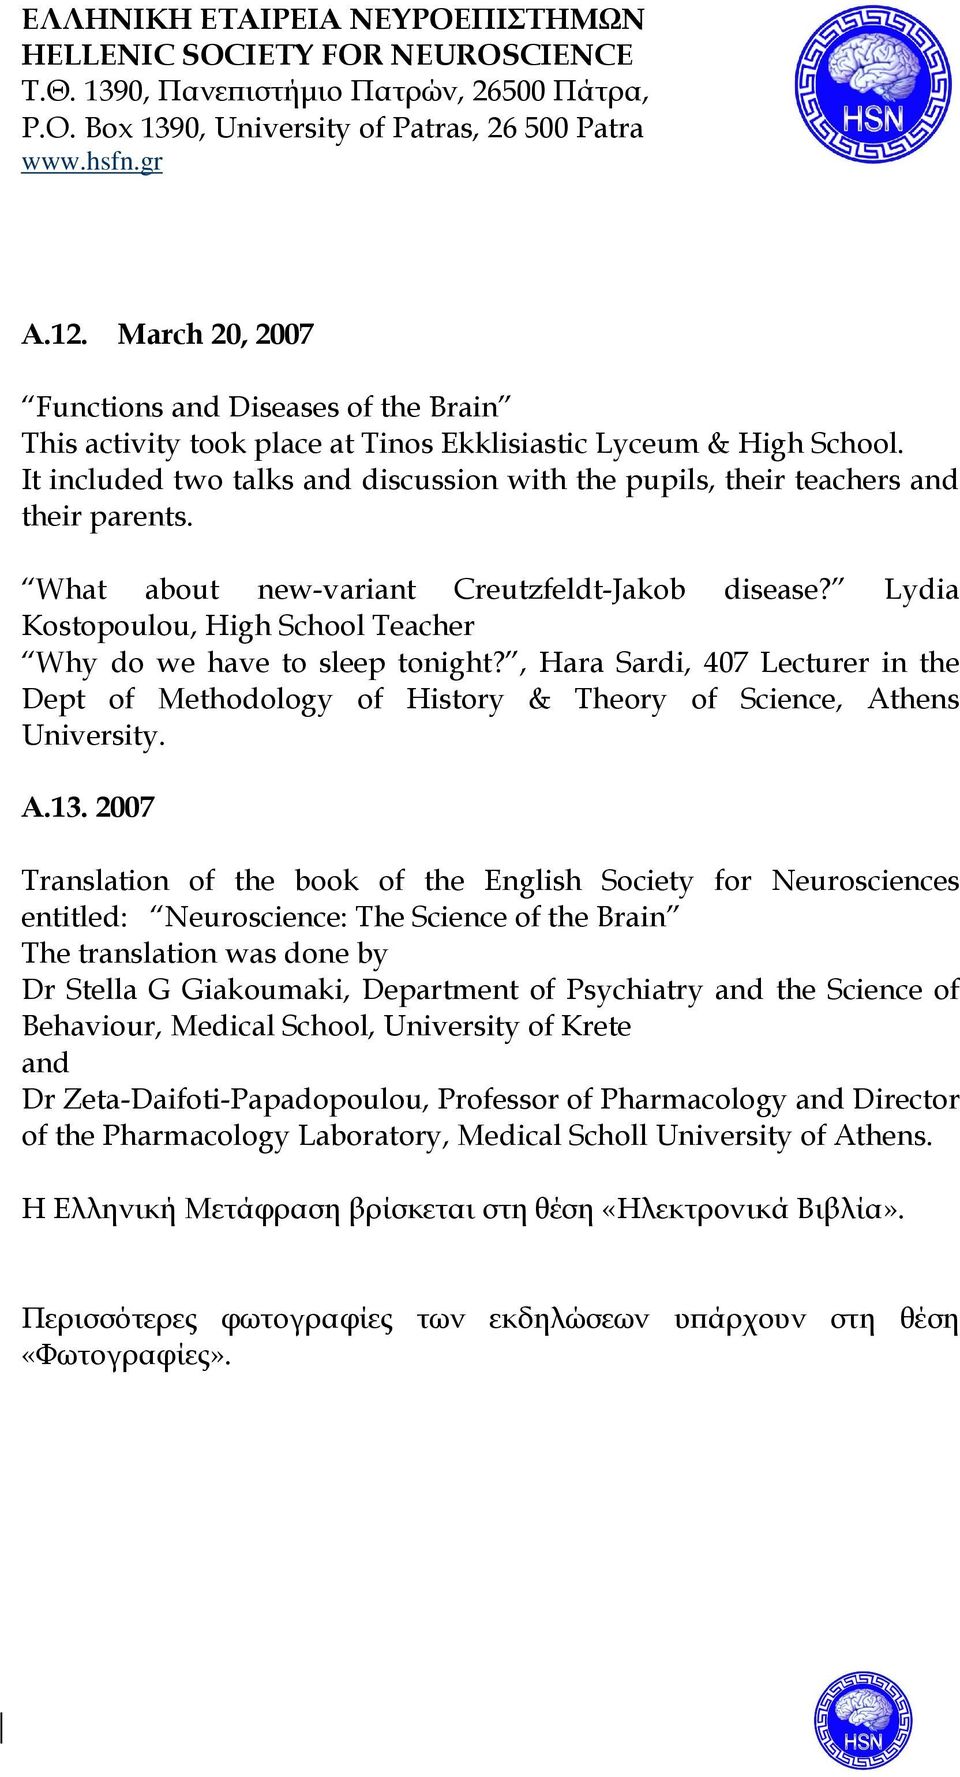 Lydia Kostopoulou, High School Teacher Why do we have to sleep tonight?, Hara Sardi, 407 Lecturer in the Dept of Methodology of History & Theory of Science, Athens University. Α.13.